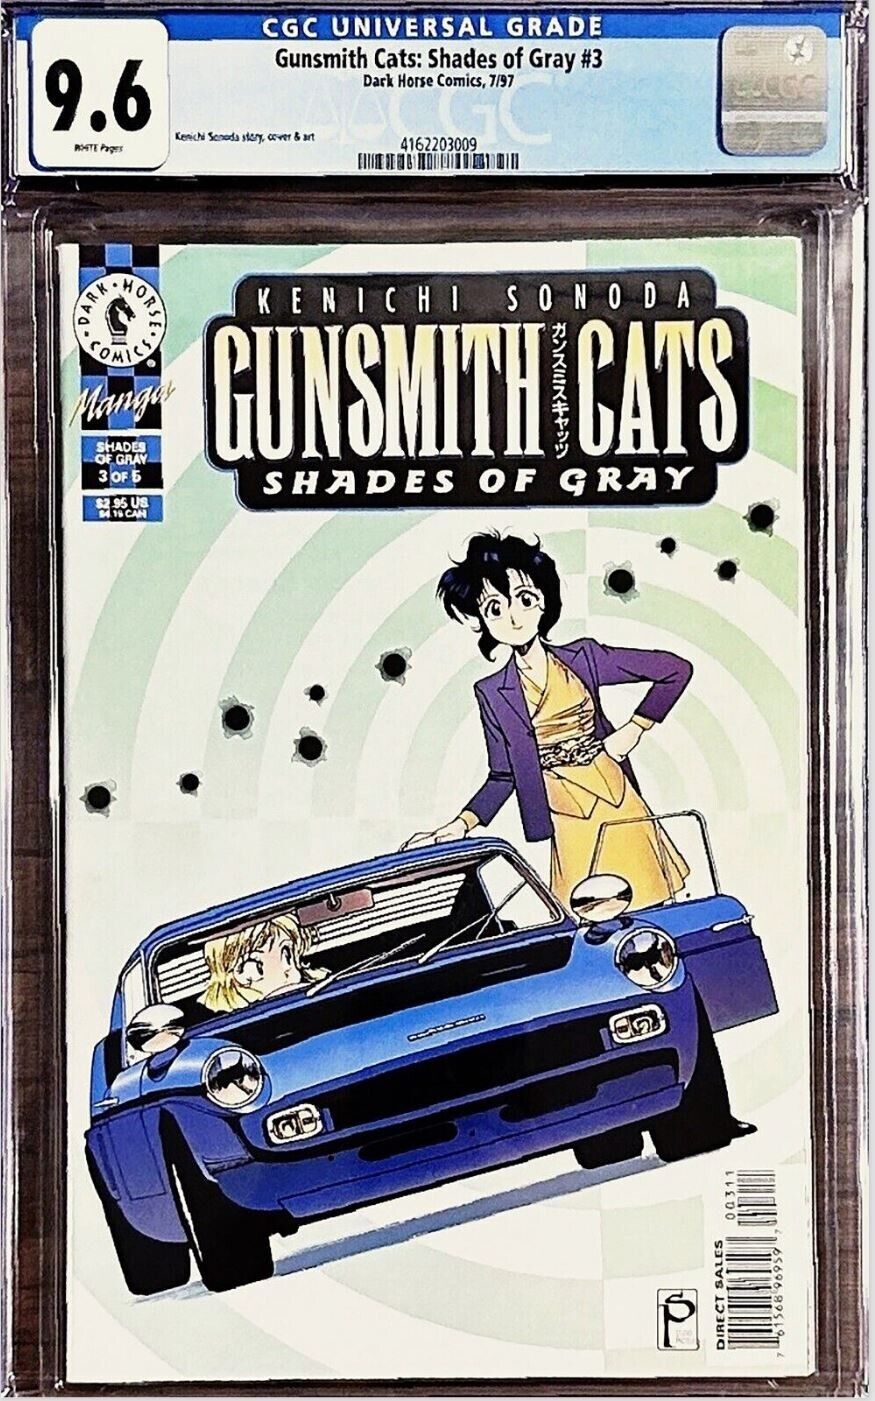 Gunsmith Cats: Shades of Gray #3 - First and Only CGC Graded Comic POP 1 Manga